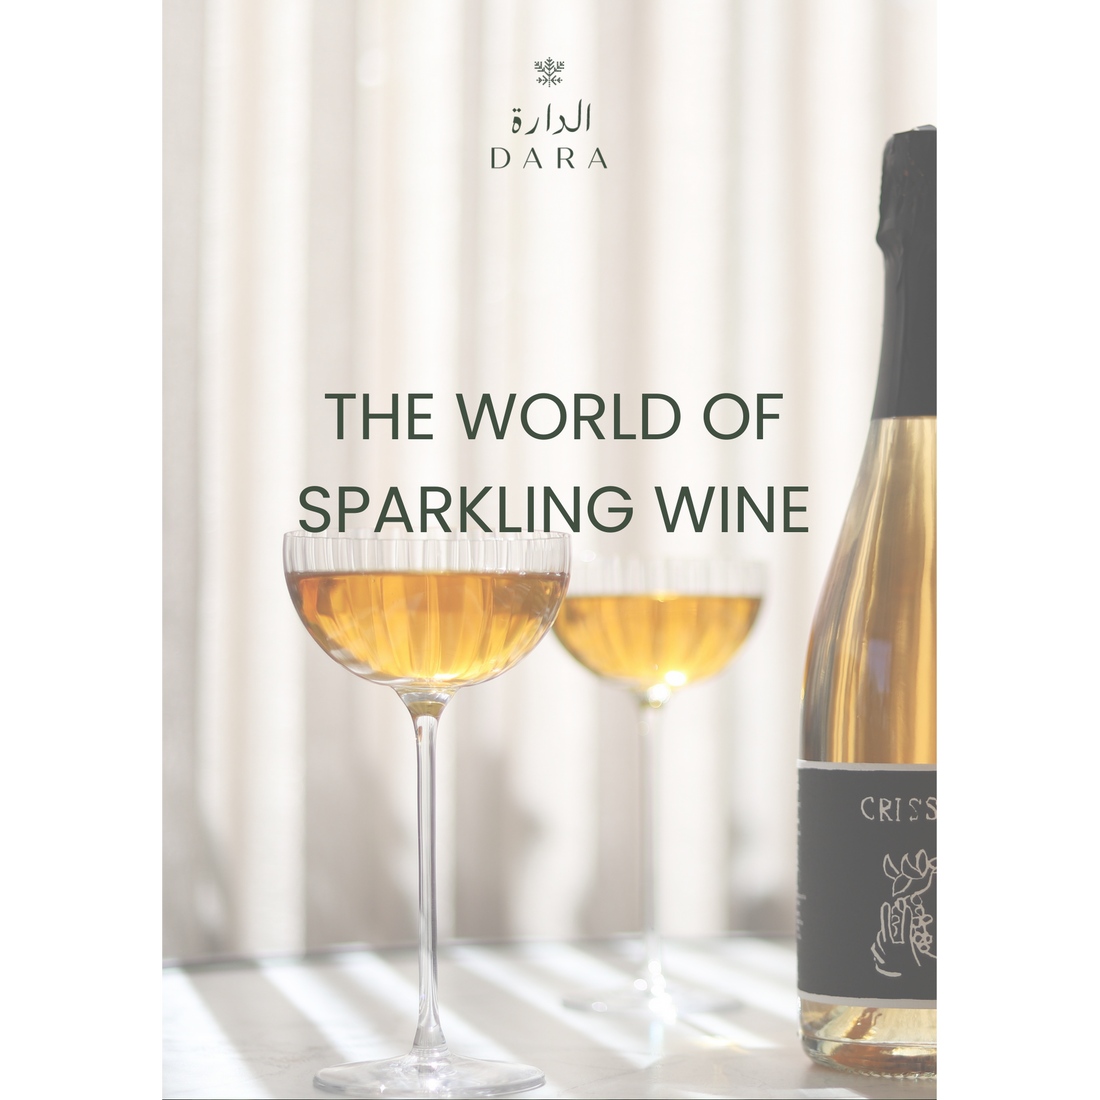 The World of Sparkling Wine Tasting Class